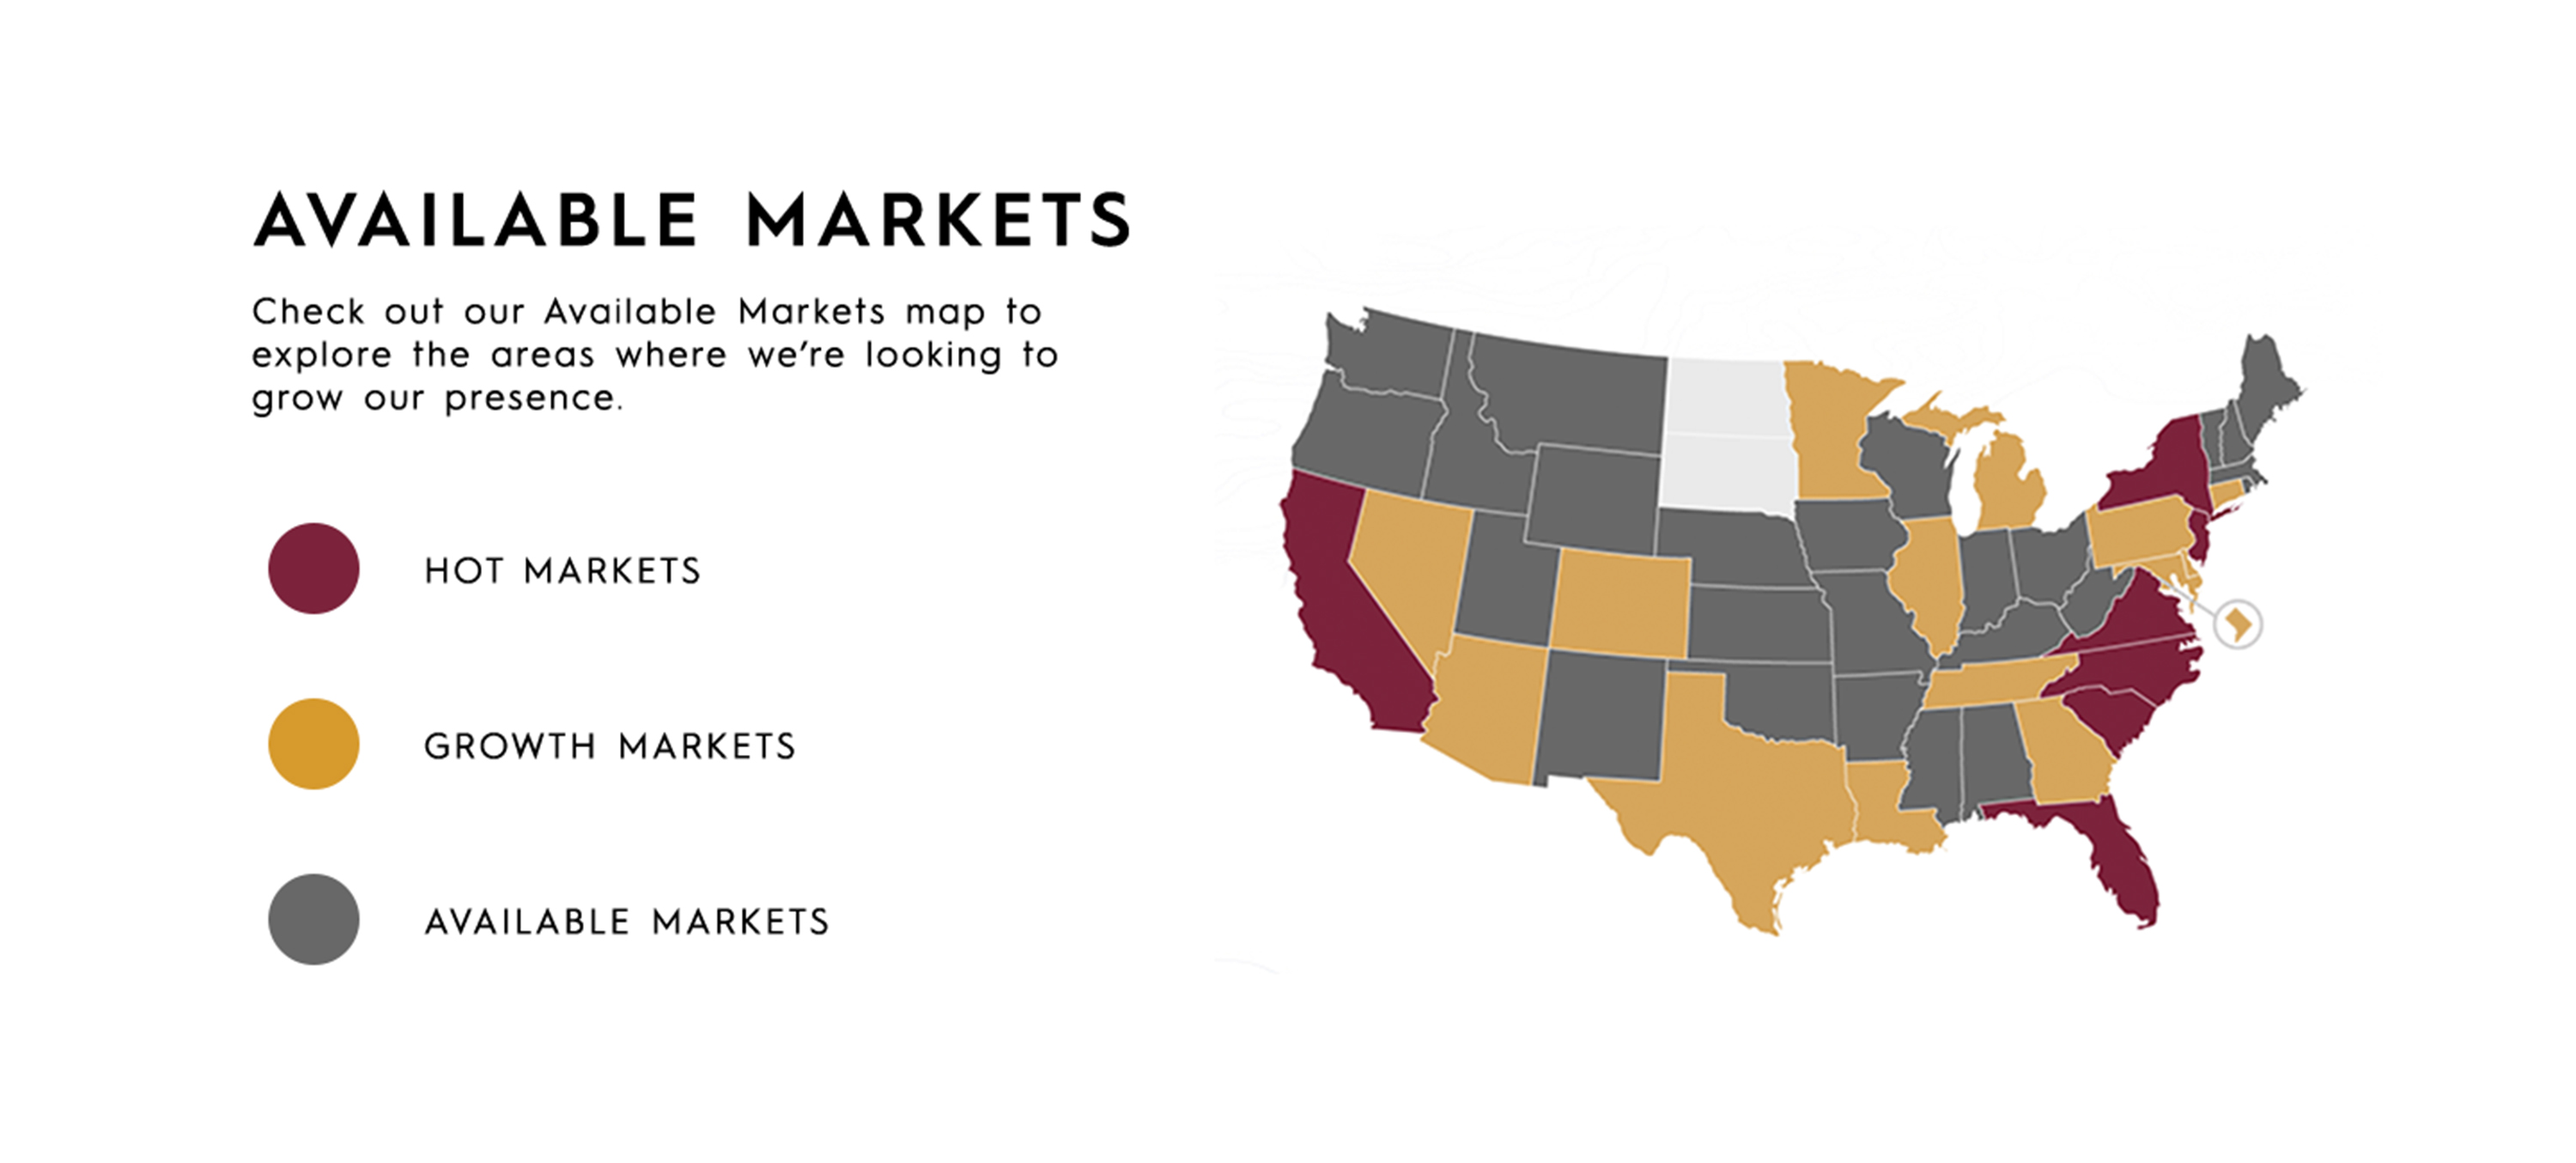 Haagen-Dazs map of us with available markets for franchise